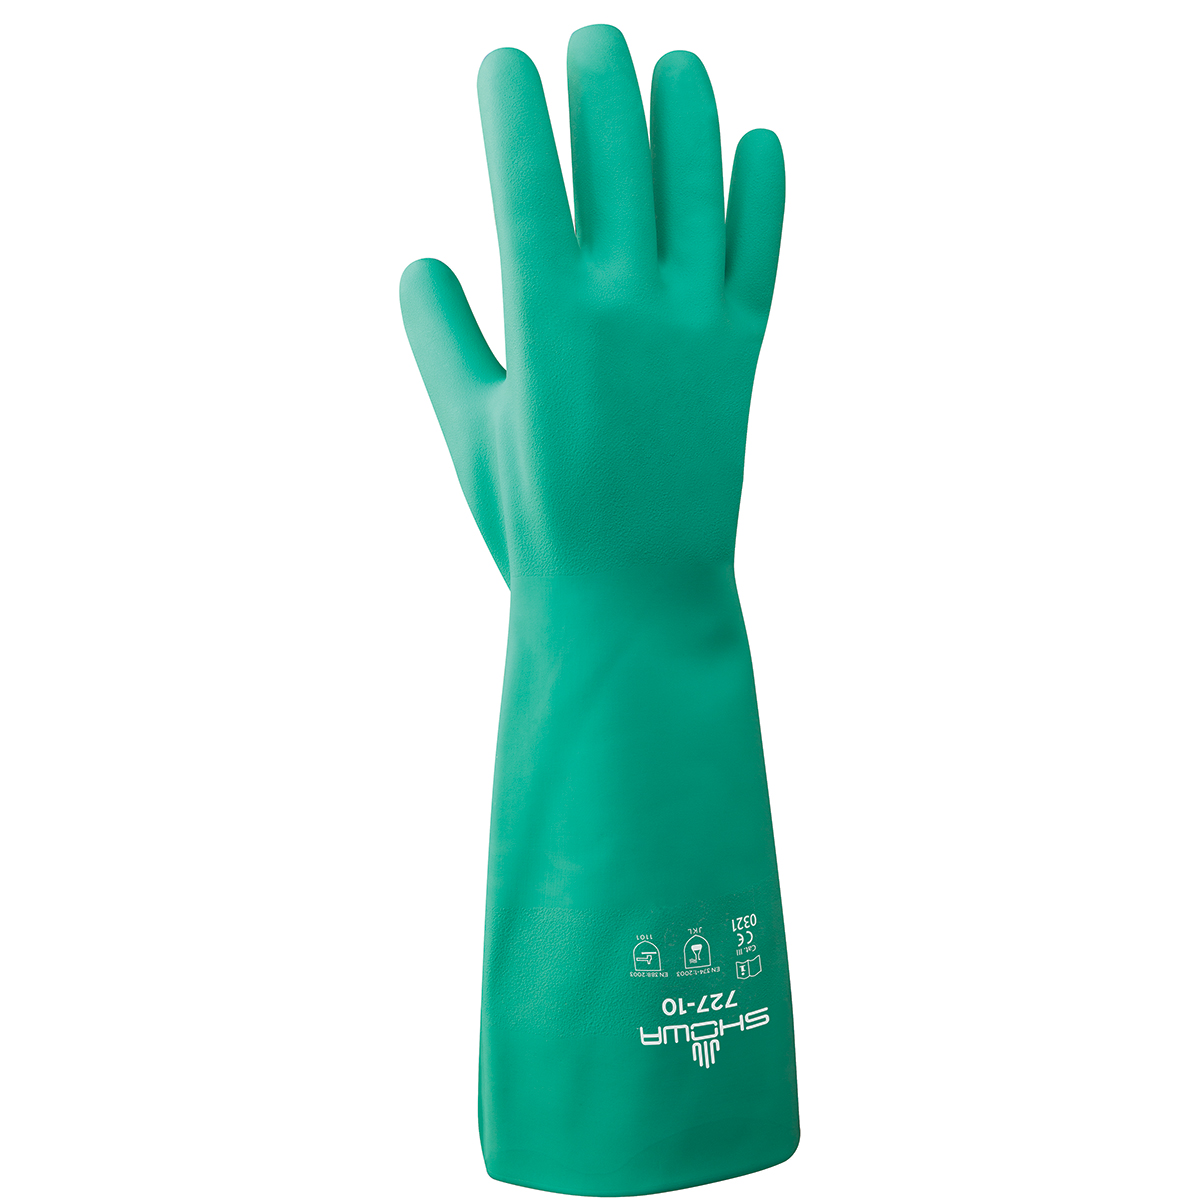 Chemical resistant unsupported nitrile, 13", 15-mil, light green, bisque finish, unlined, large